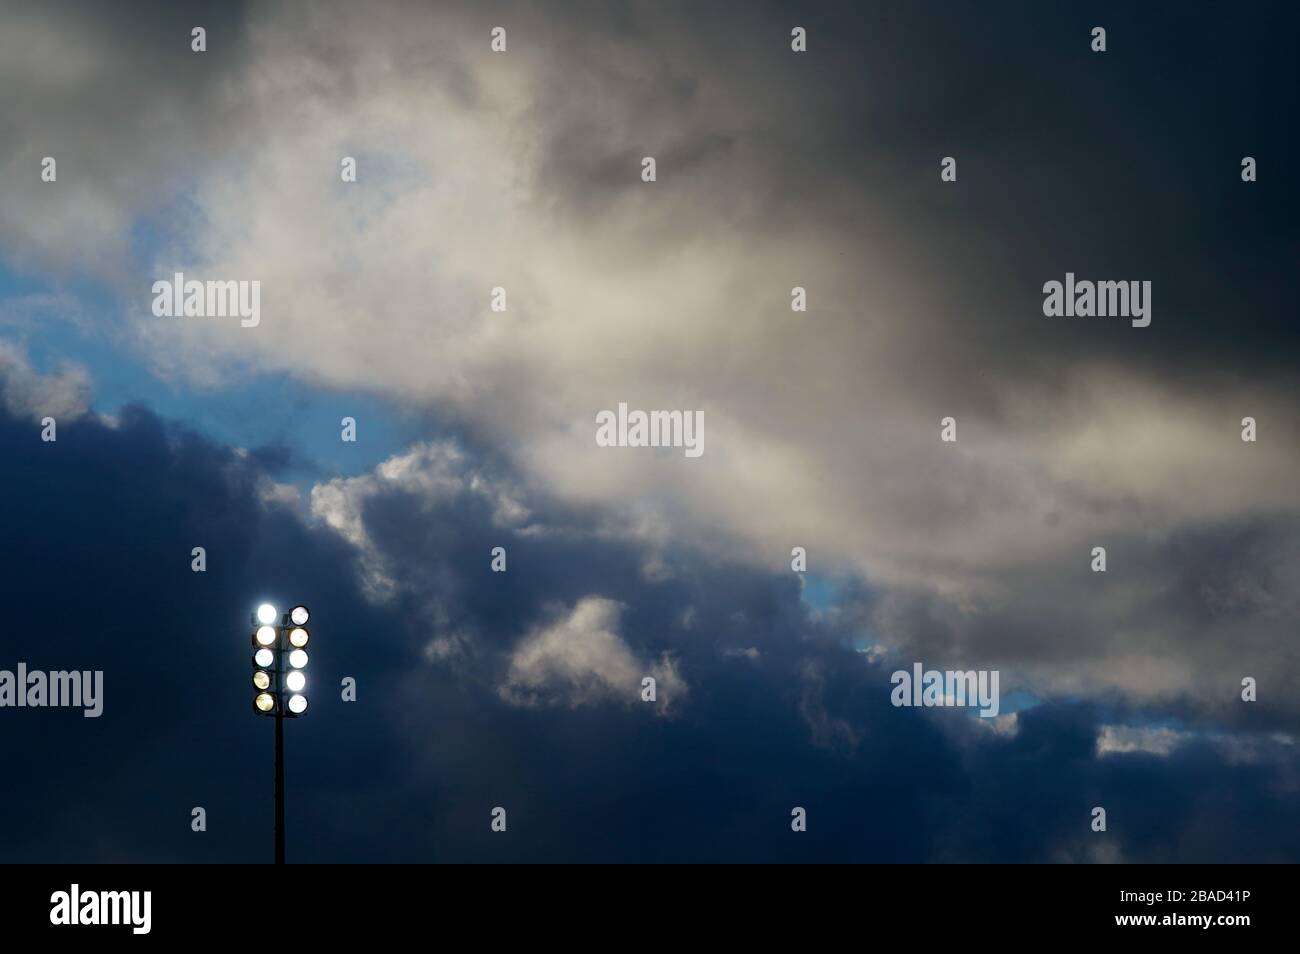 General view of dark clouds over a floodlight Stock Photo